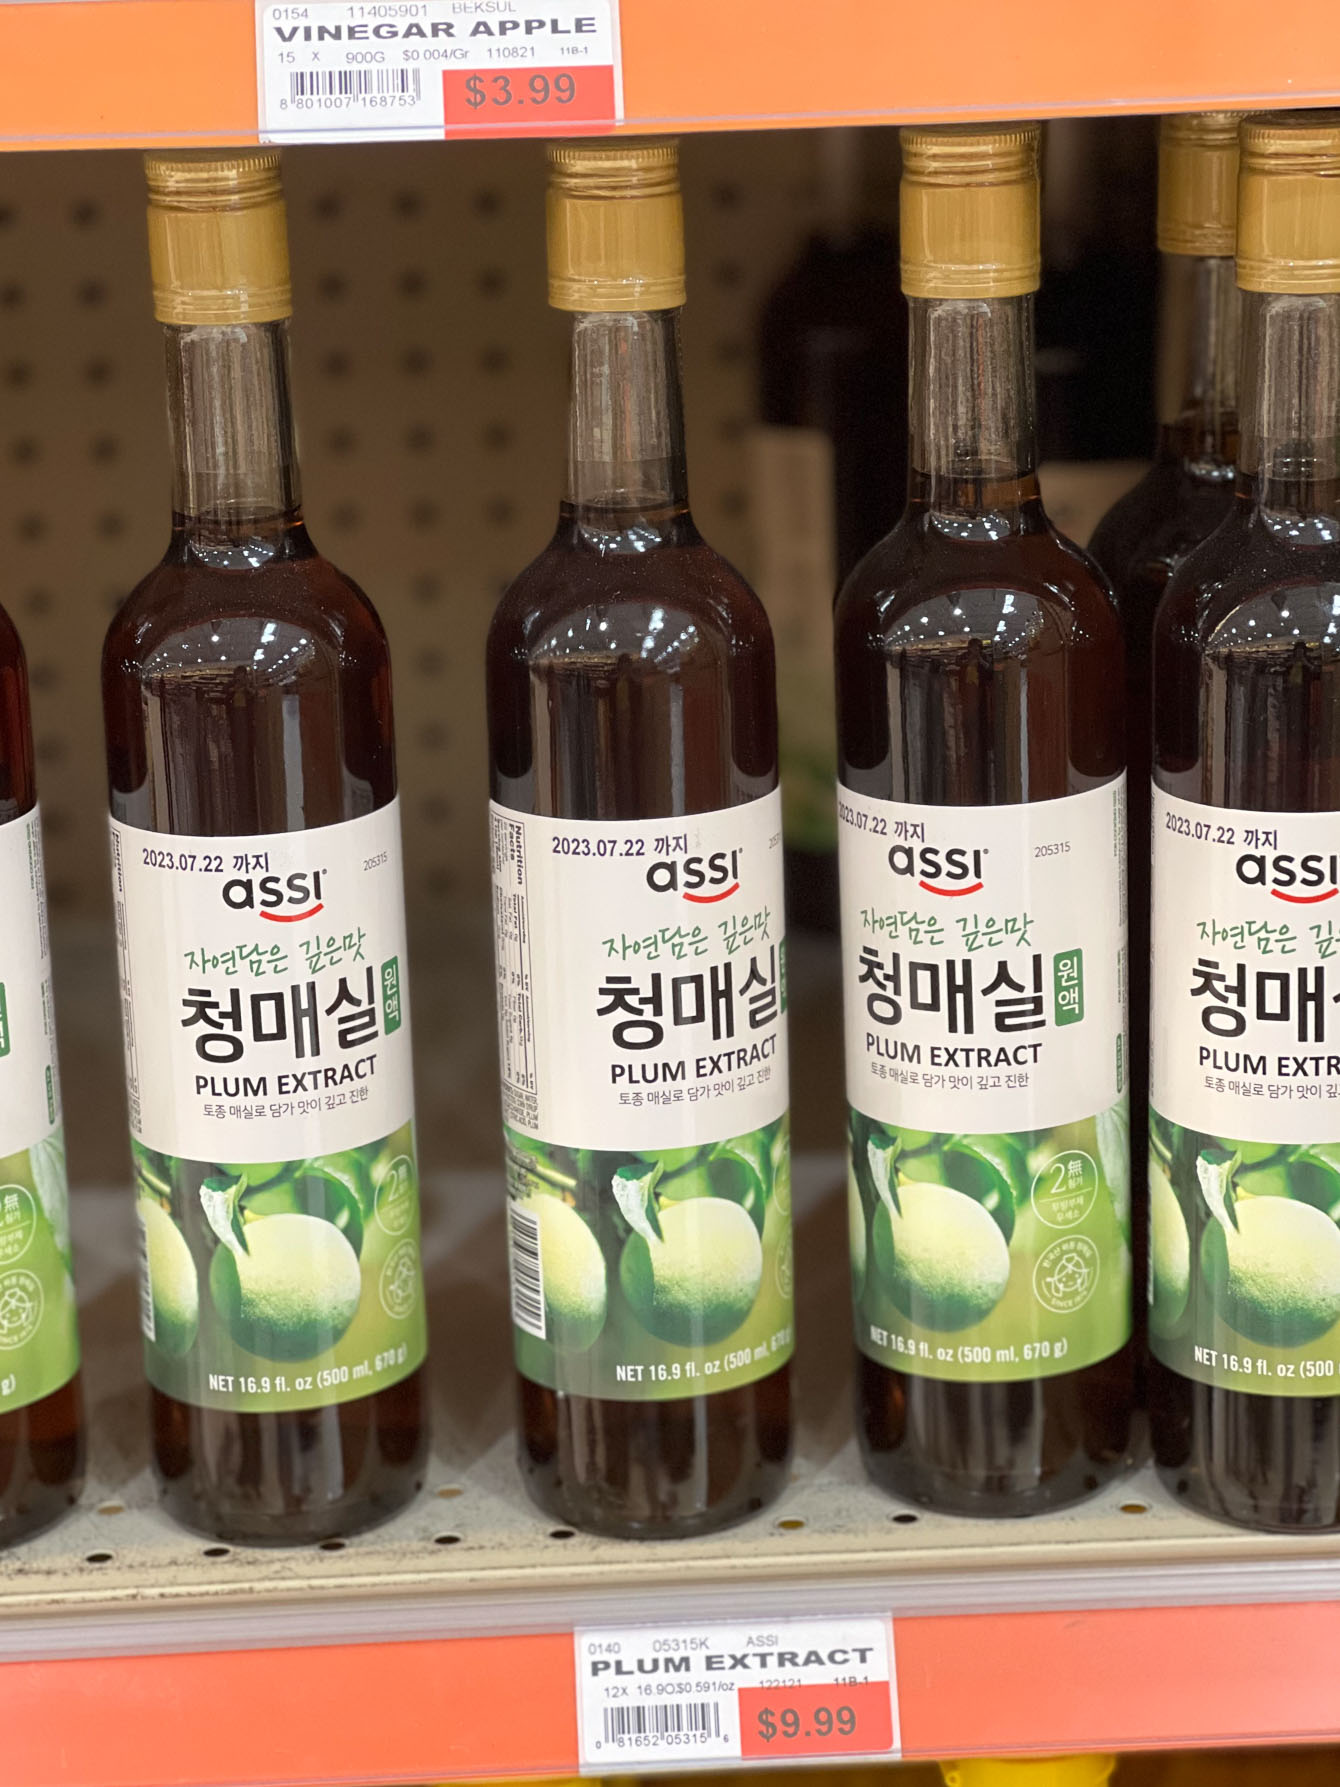 Bottles of Korean plum extracts are presented on the shelf